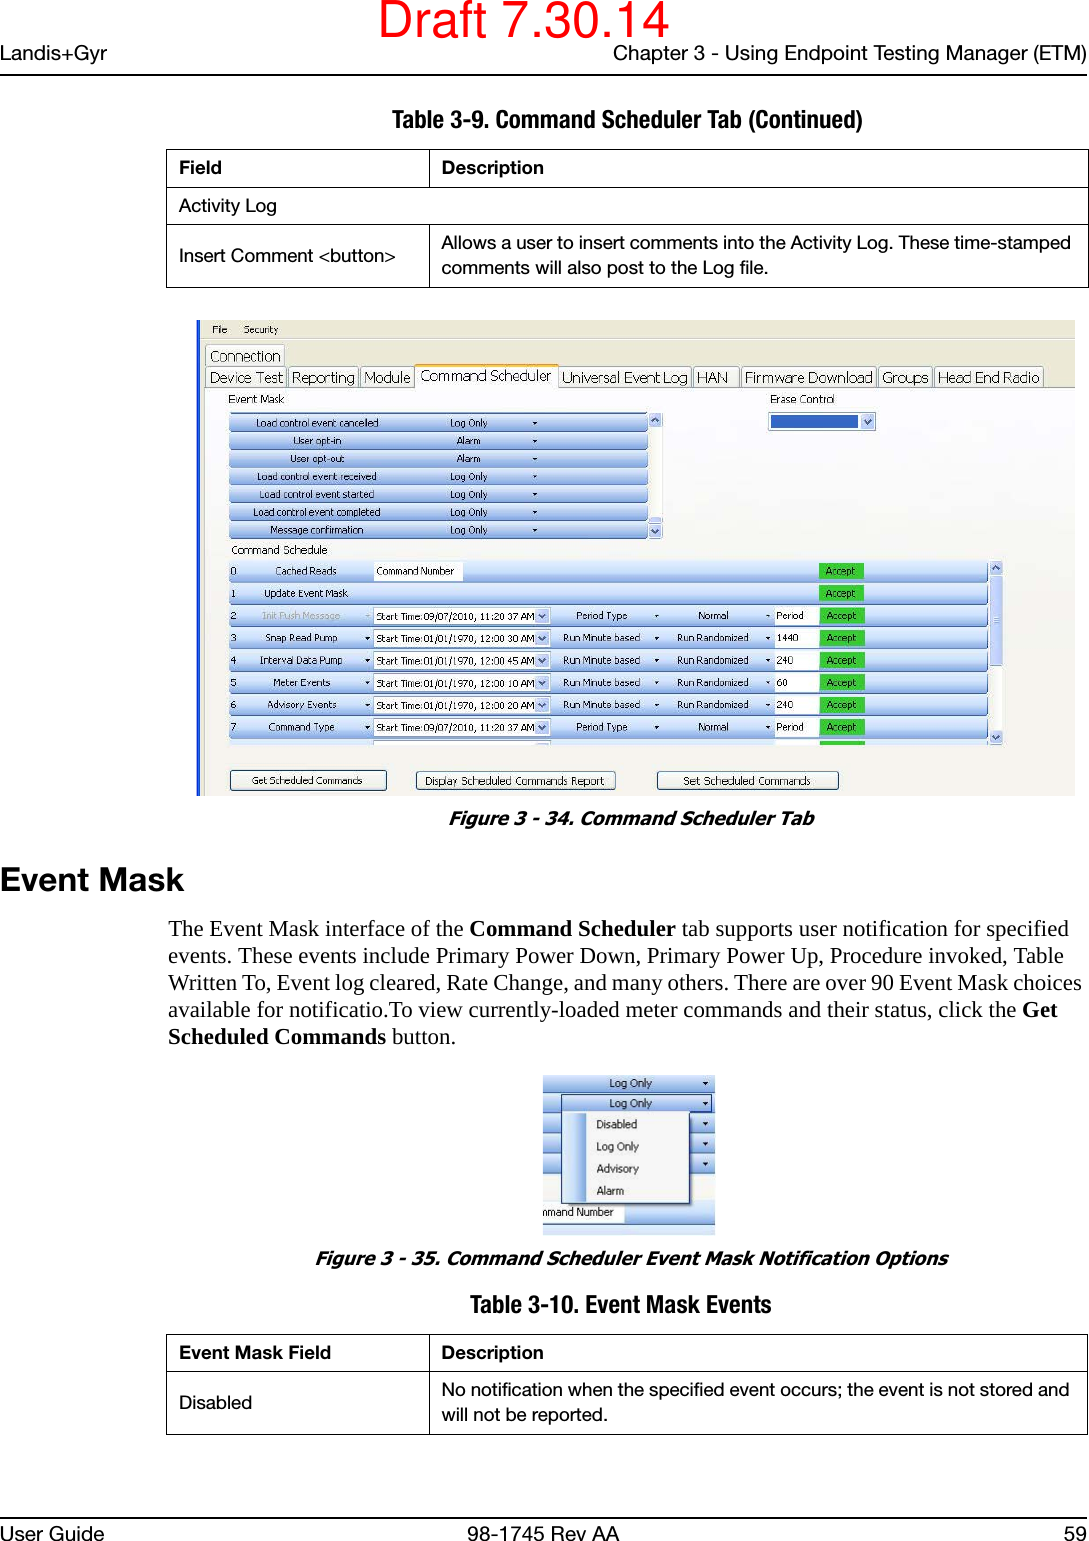 Landis+Gyr Chapter 3 - Using Endpoint Testing Manager (ETM)User Guide 98-1745 Rev AA 59 Figure 3 - 34. Command Scheduler TabEvent MaskThe Event Mask interface of the Command Scheduler tab supports user notification for specified events. These events include Primary Power Down, Primary Power Up, Procedure invoked, Table Written To, Event log cleared, Rate Change, and many others. There are over 90 Event Mask choices available for notificatio.To view currently-loaded meter commands and their status, click the Get Scheduled Commands button. Figure 3 - 35. Command Scheduler Event Mask Notification Options Activity LogInsert Comment &lt;button&gt; Allows a user to insert comments into the Activity Log. These time-stamped comments will also post to the Log file.Table 3-9. Command Scheduler Tab (Continued)Field DescriptionTable 3-10. Event Mask Events Event Mask Field DescriptionDisabled No notification when the specified event occurs; the event is not stored and will not be reported.Draft 7.30.14